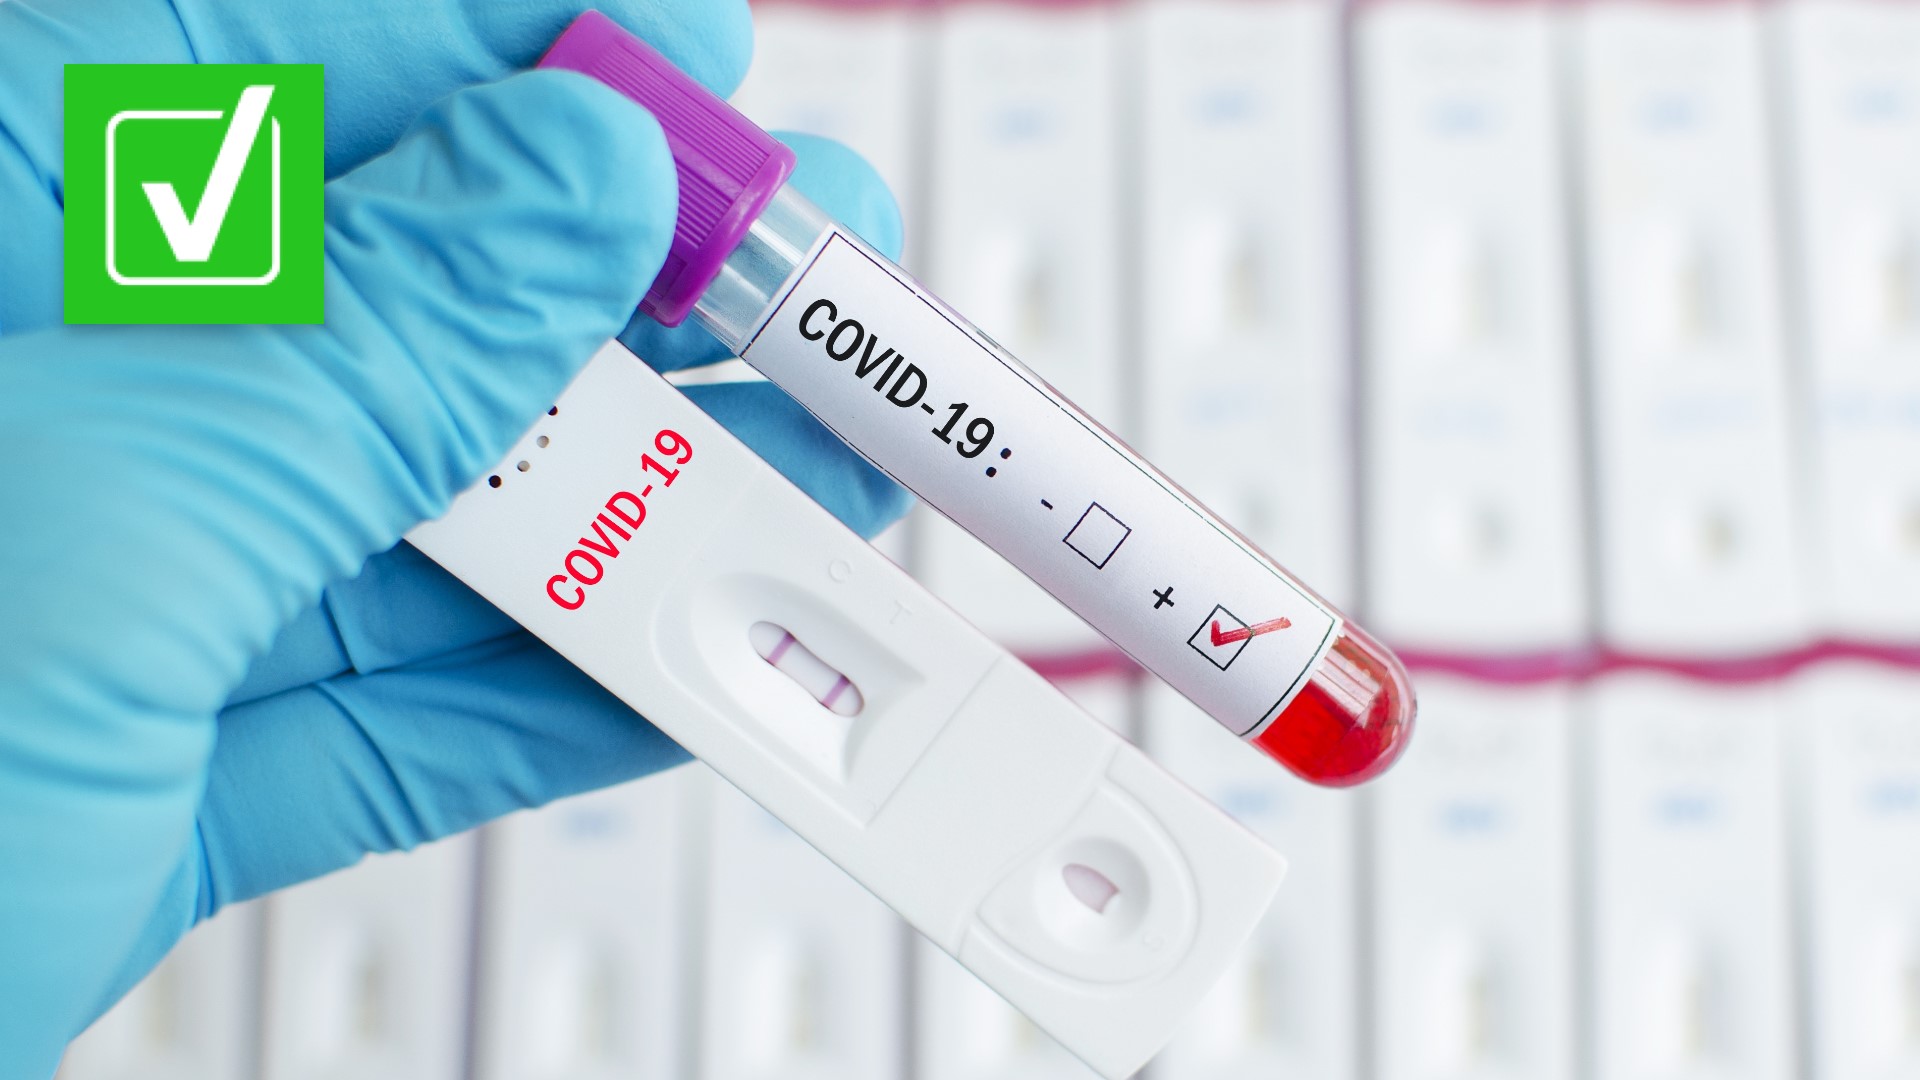 When taking a COVID-19 test at home, getting a good enough sample is key to getting an accurate result.